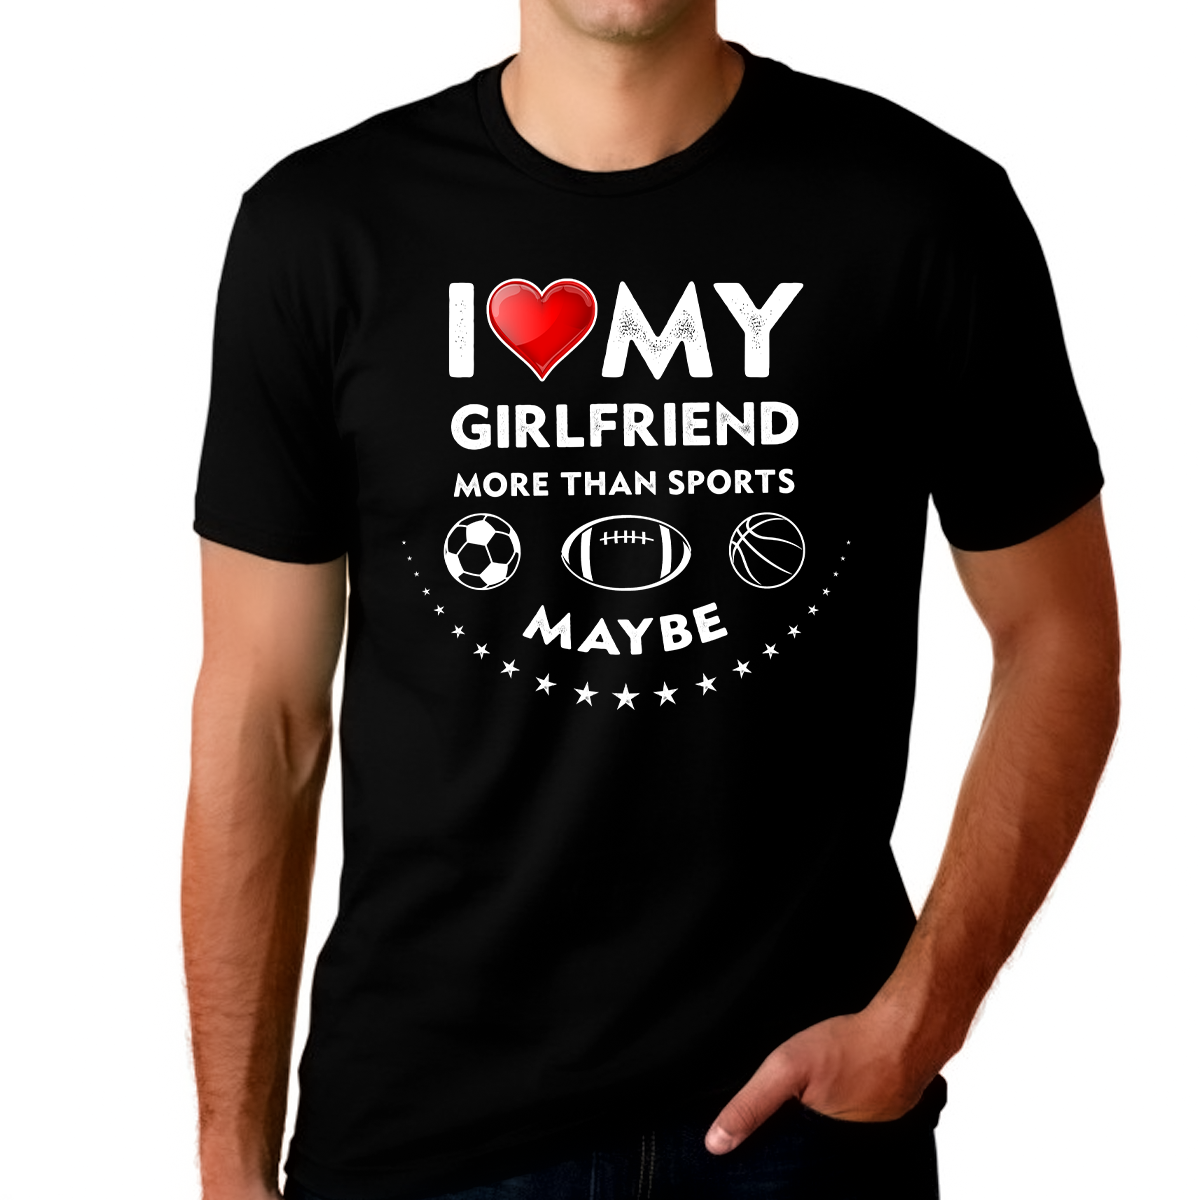 I Love My Girlfriend Shirt I Heart Sports for Men Funny Valentines Shirt Valentines Day Gifts for Him